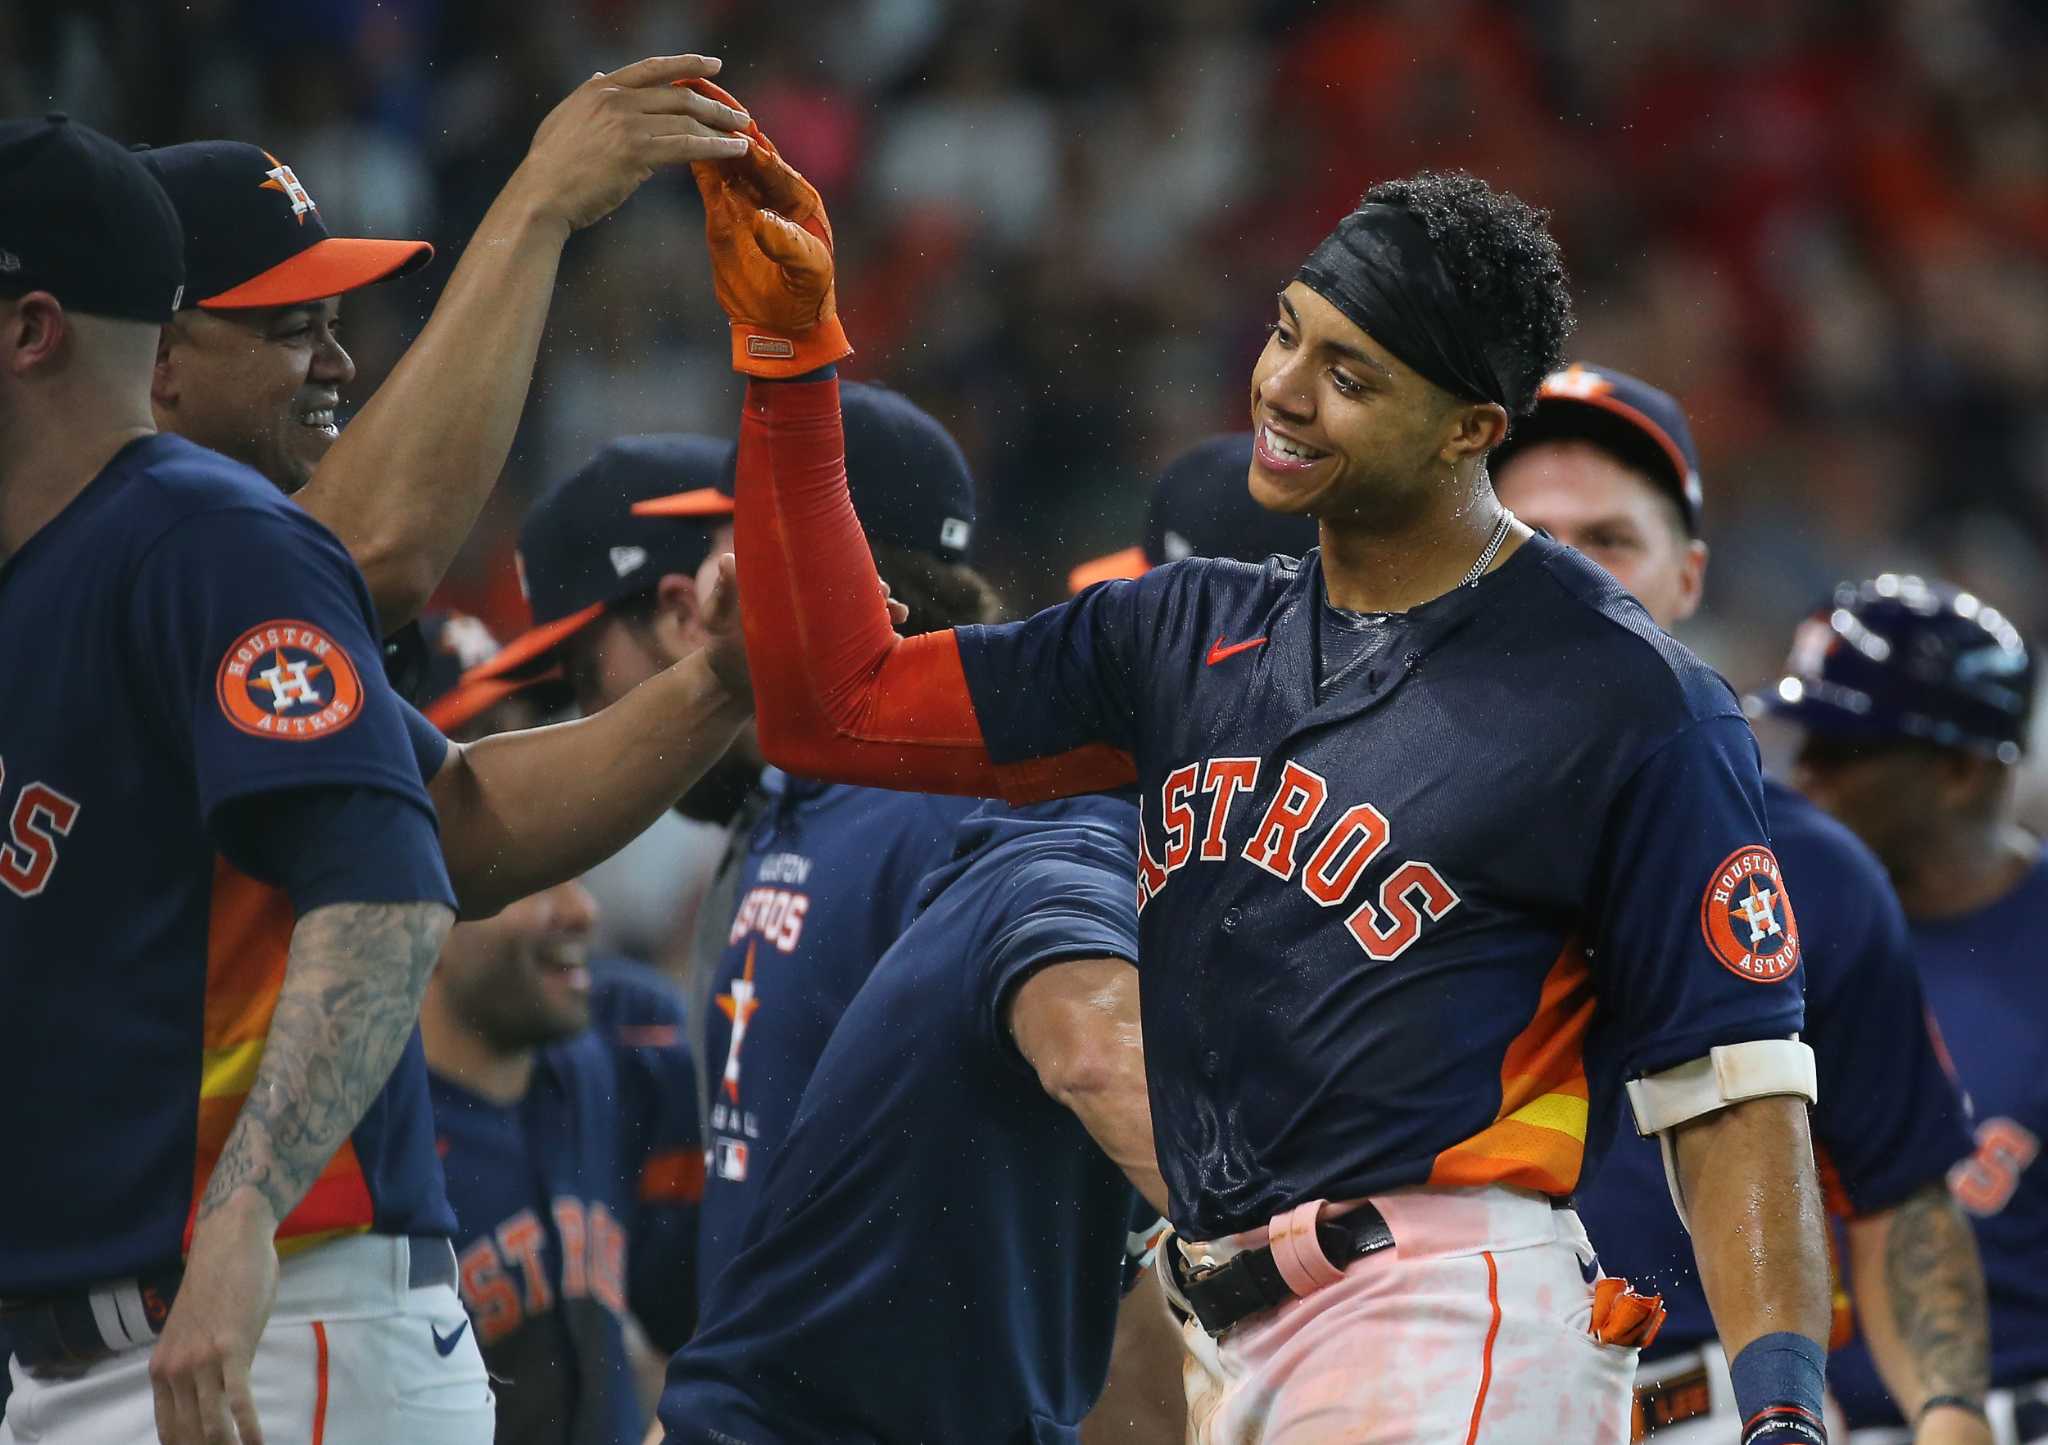 Jeremy Peña homers in return from stiff neck to help Astros